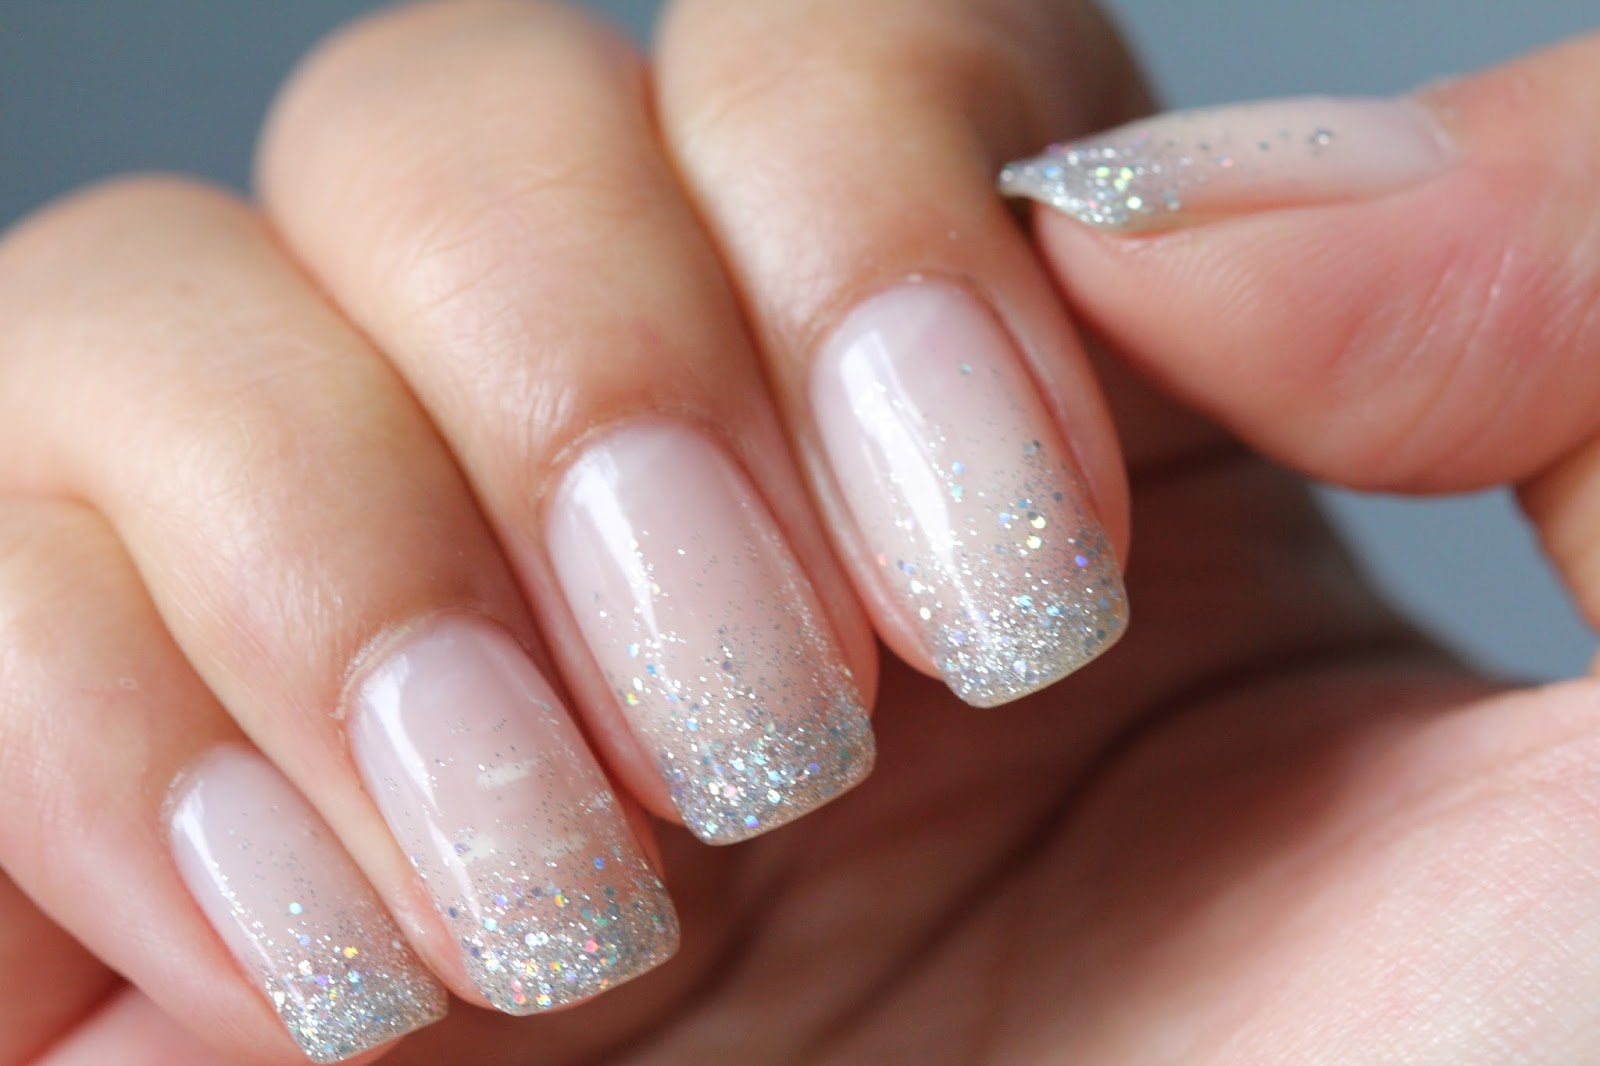 10. Glittery Short Nail Designs for a Glamorous Touch - wide 5